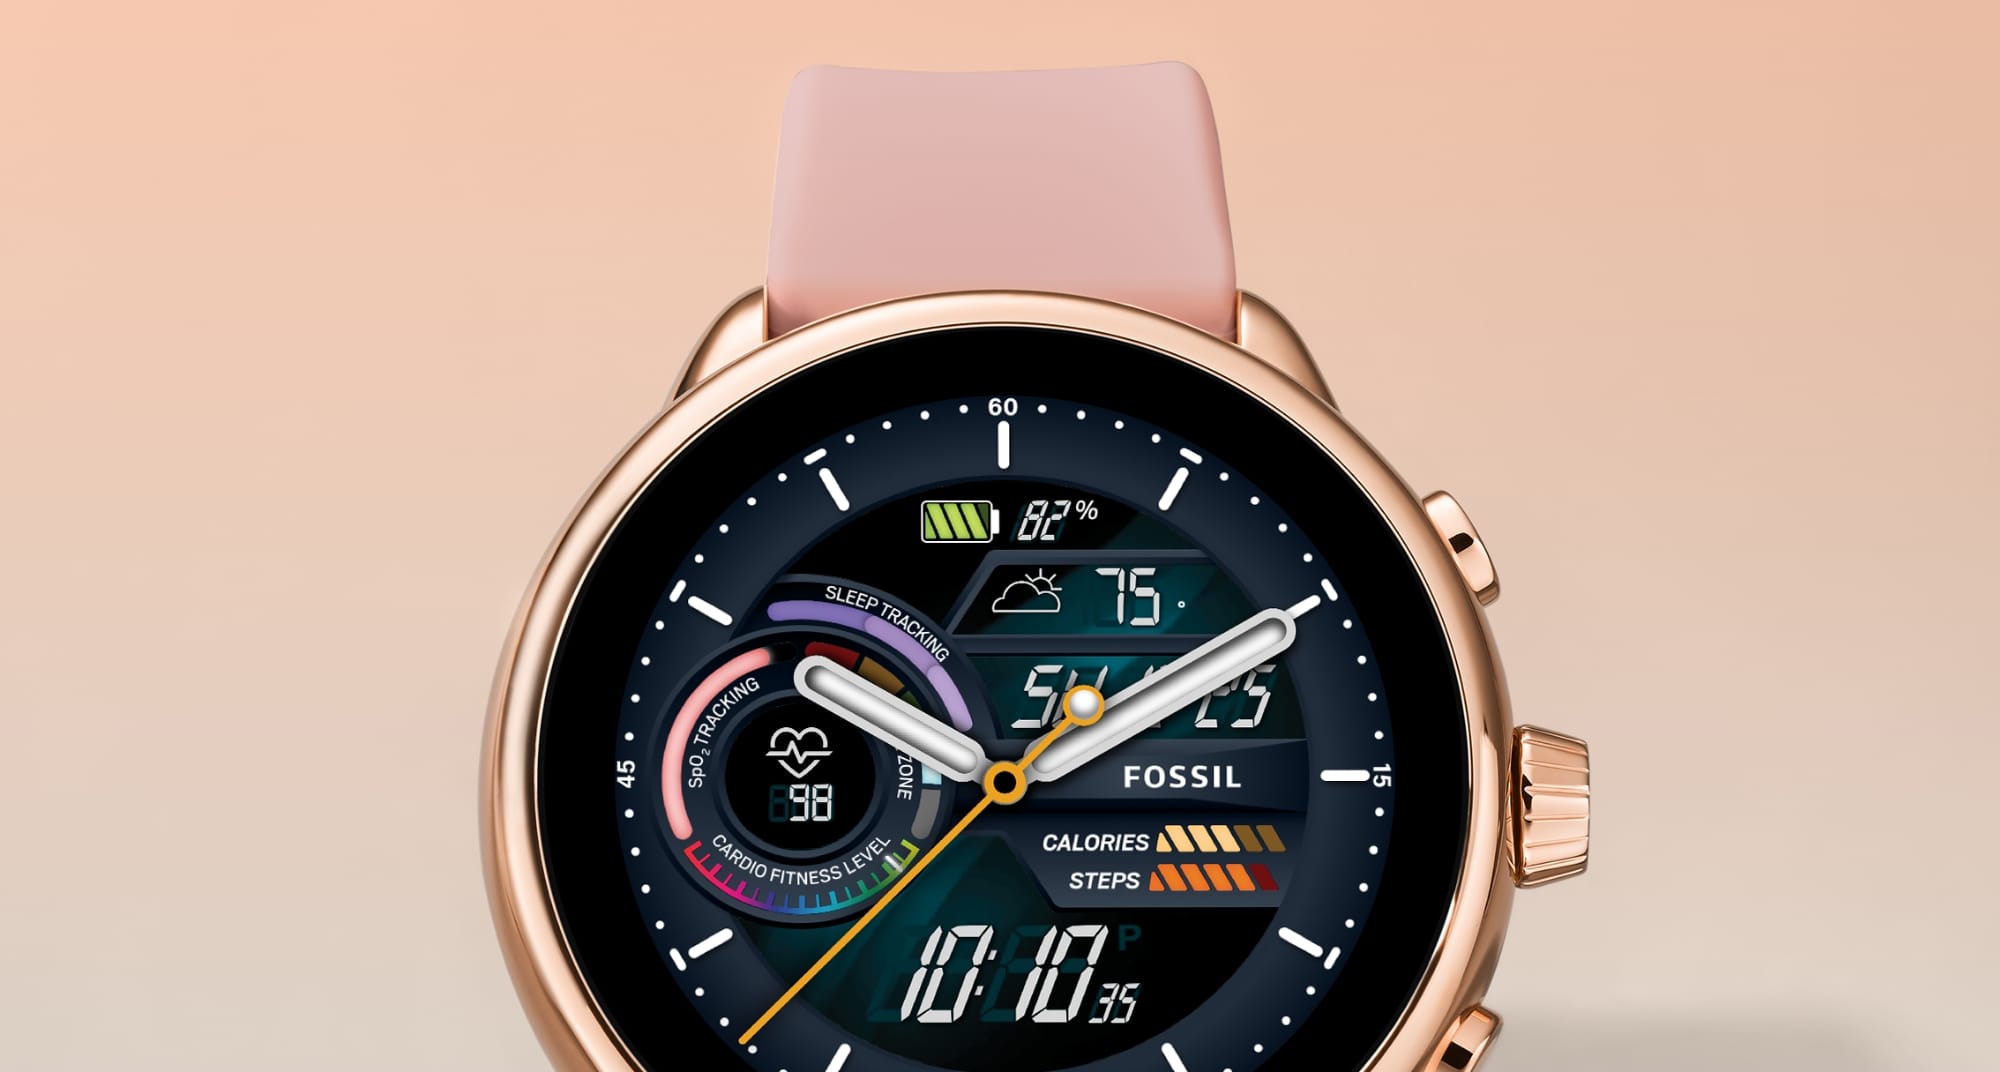 SMARTWATCHES FOR ALL